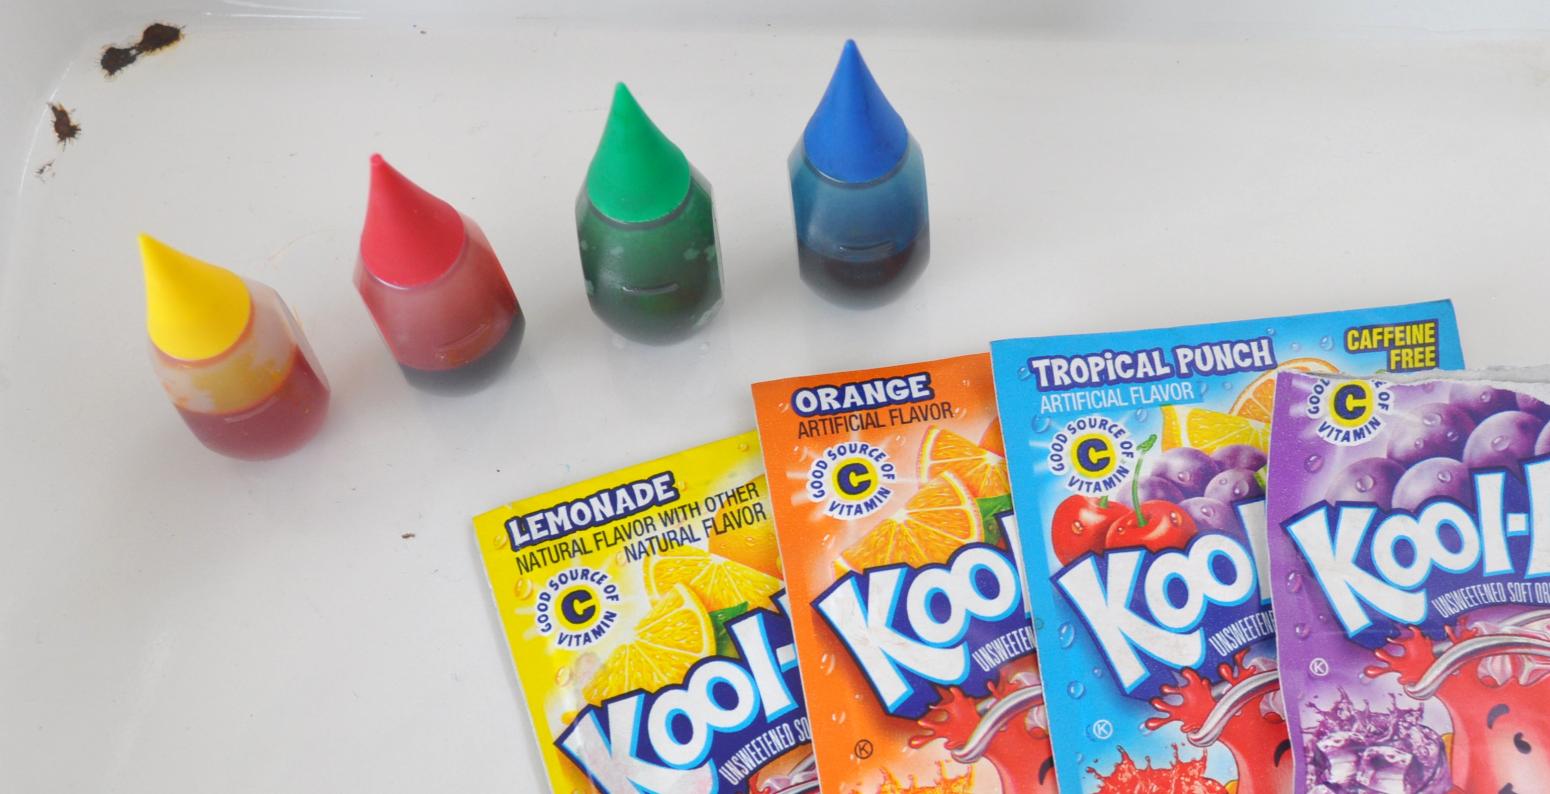 Food coloring bottles and Kool-Aid packets.